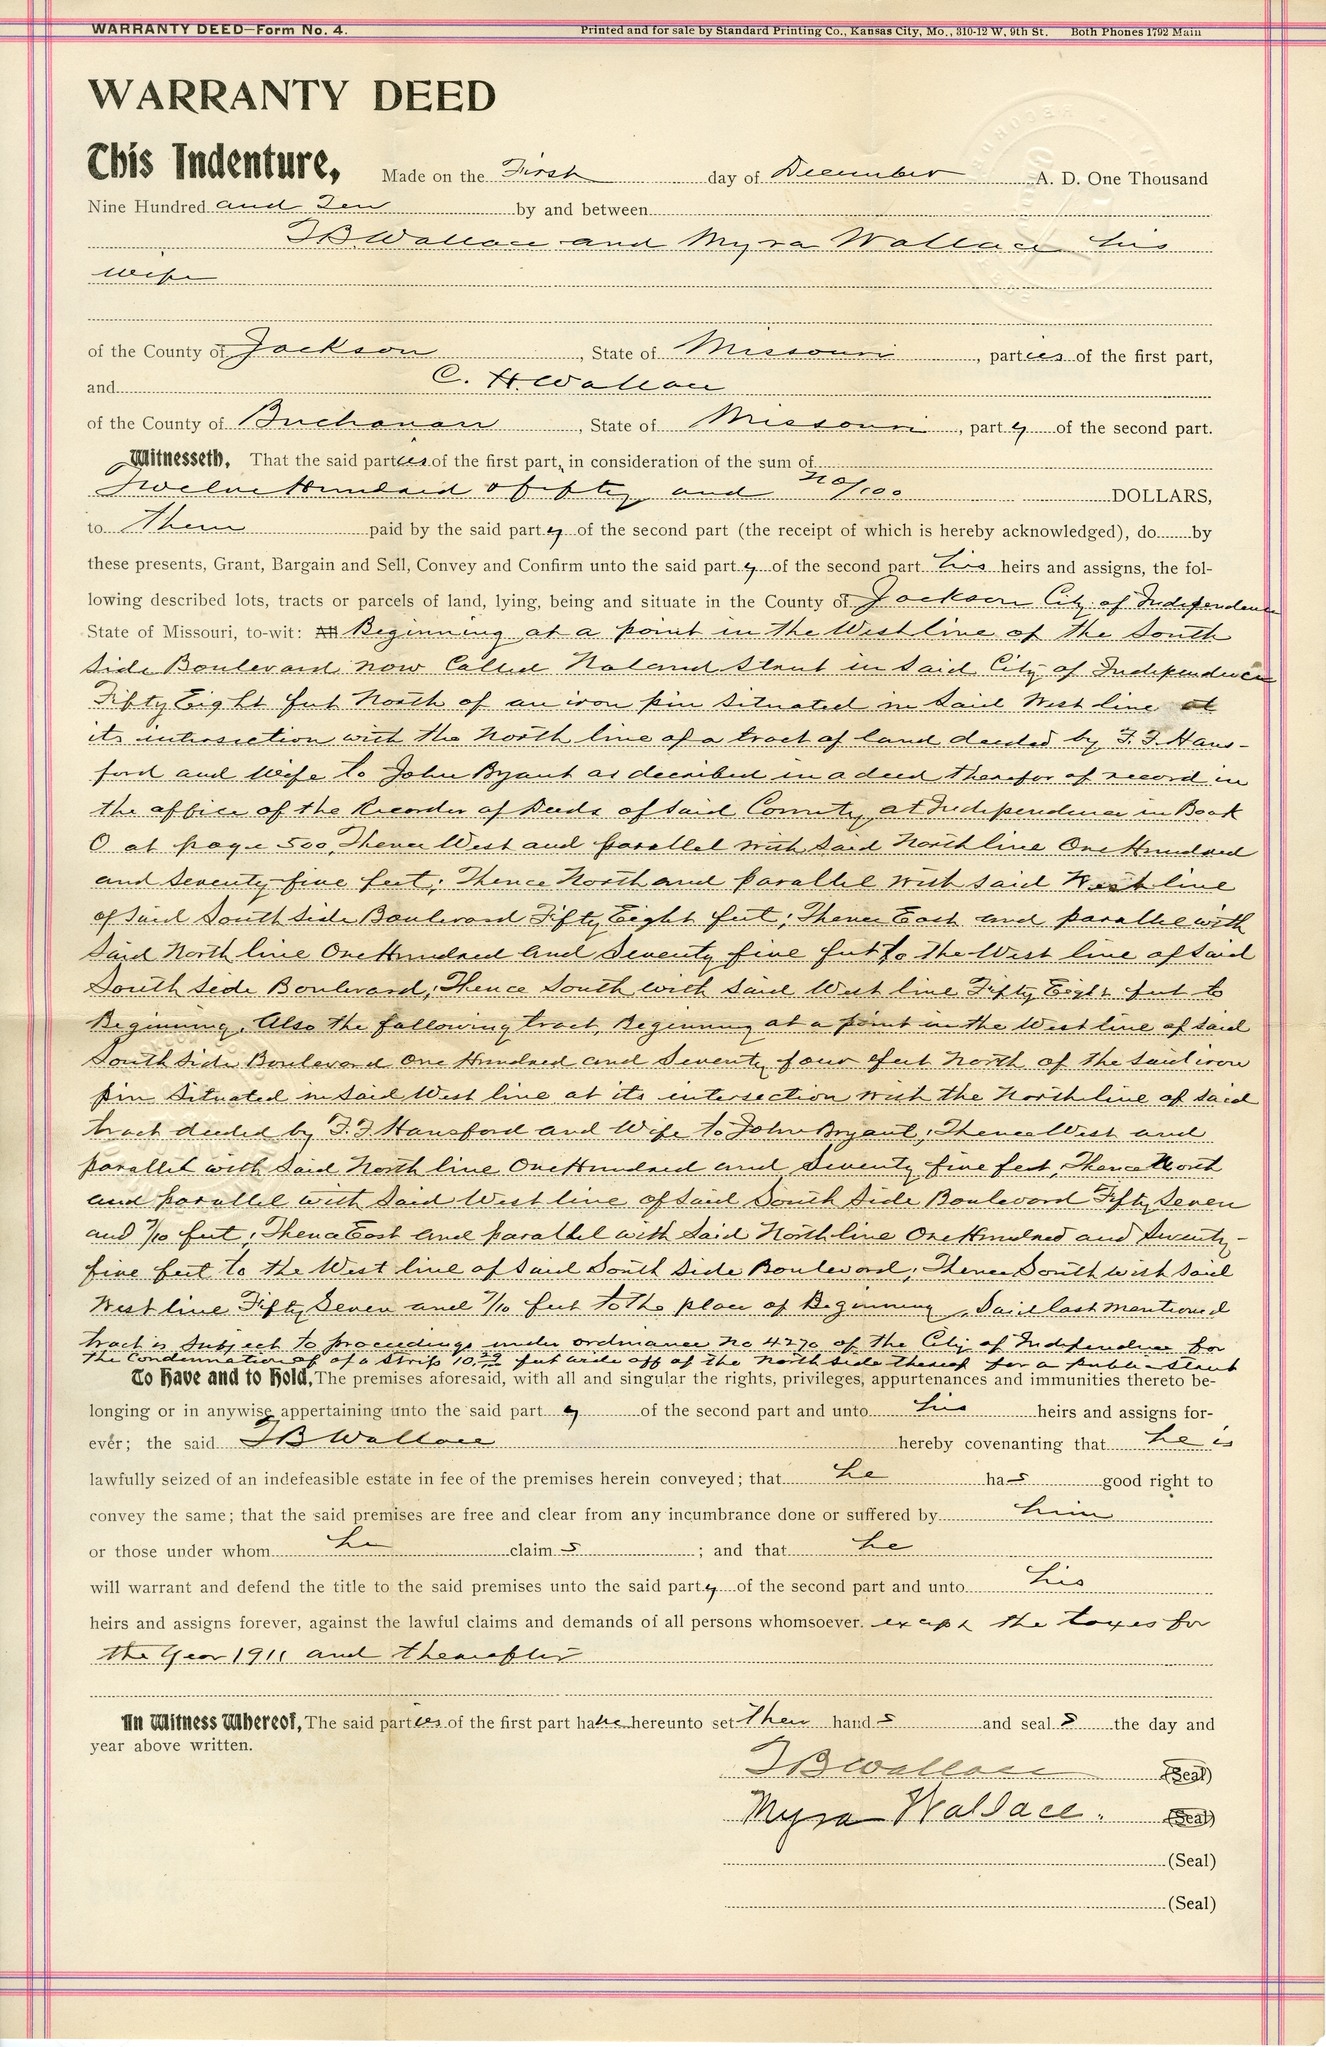 Warranty Deed from T. B. Wallace and Myra Wallace to C. H. Wallace